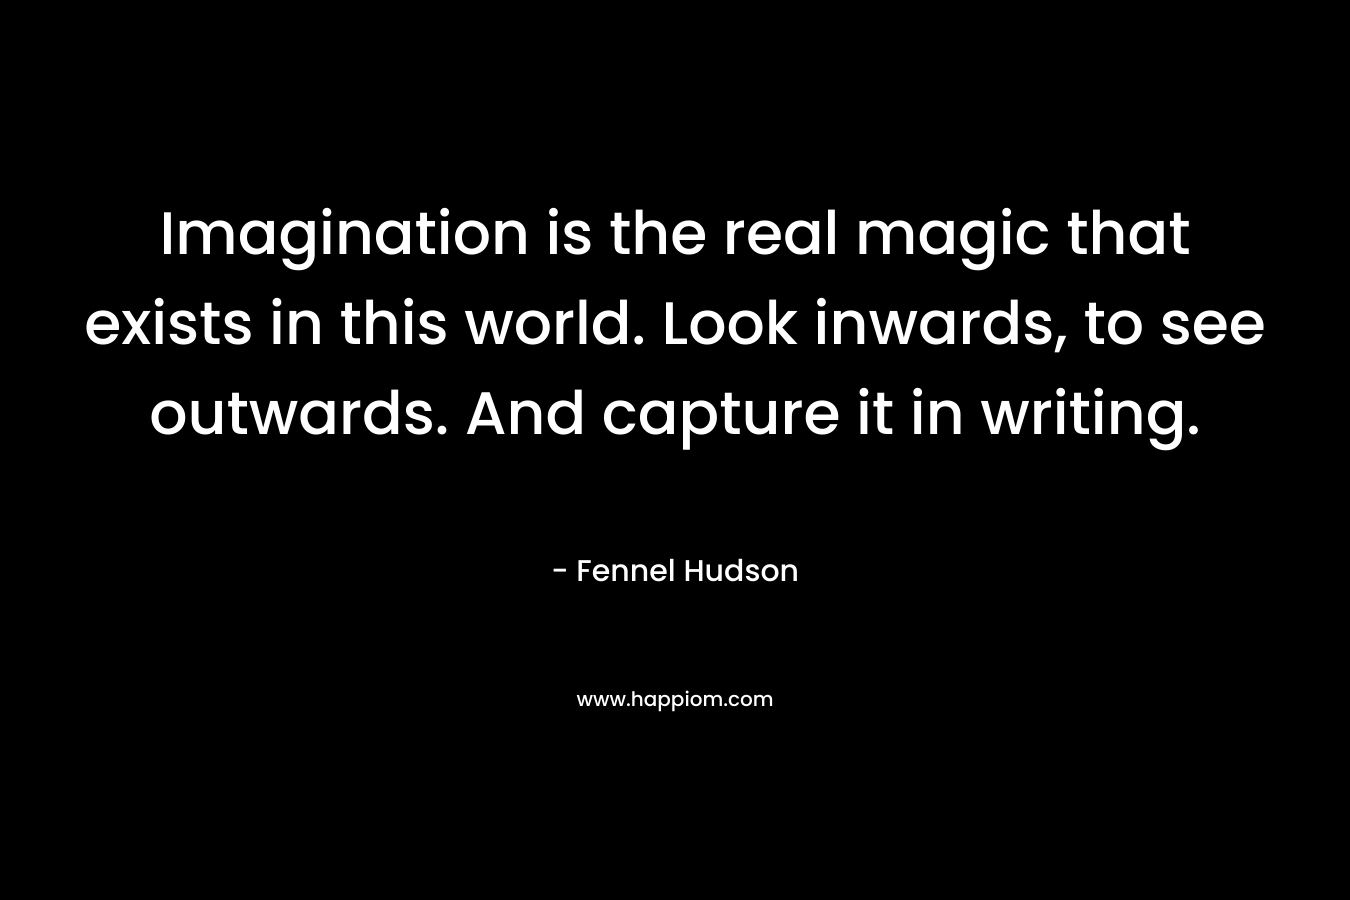 Imagination is the real magic that exists in this world. Look inwards, to see outwards. And capture it in writing. – Fennel Hudson